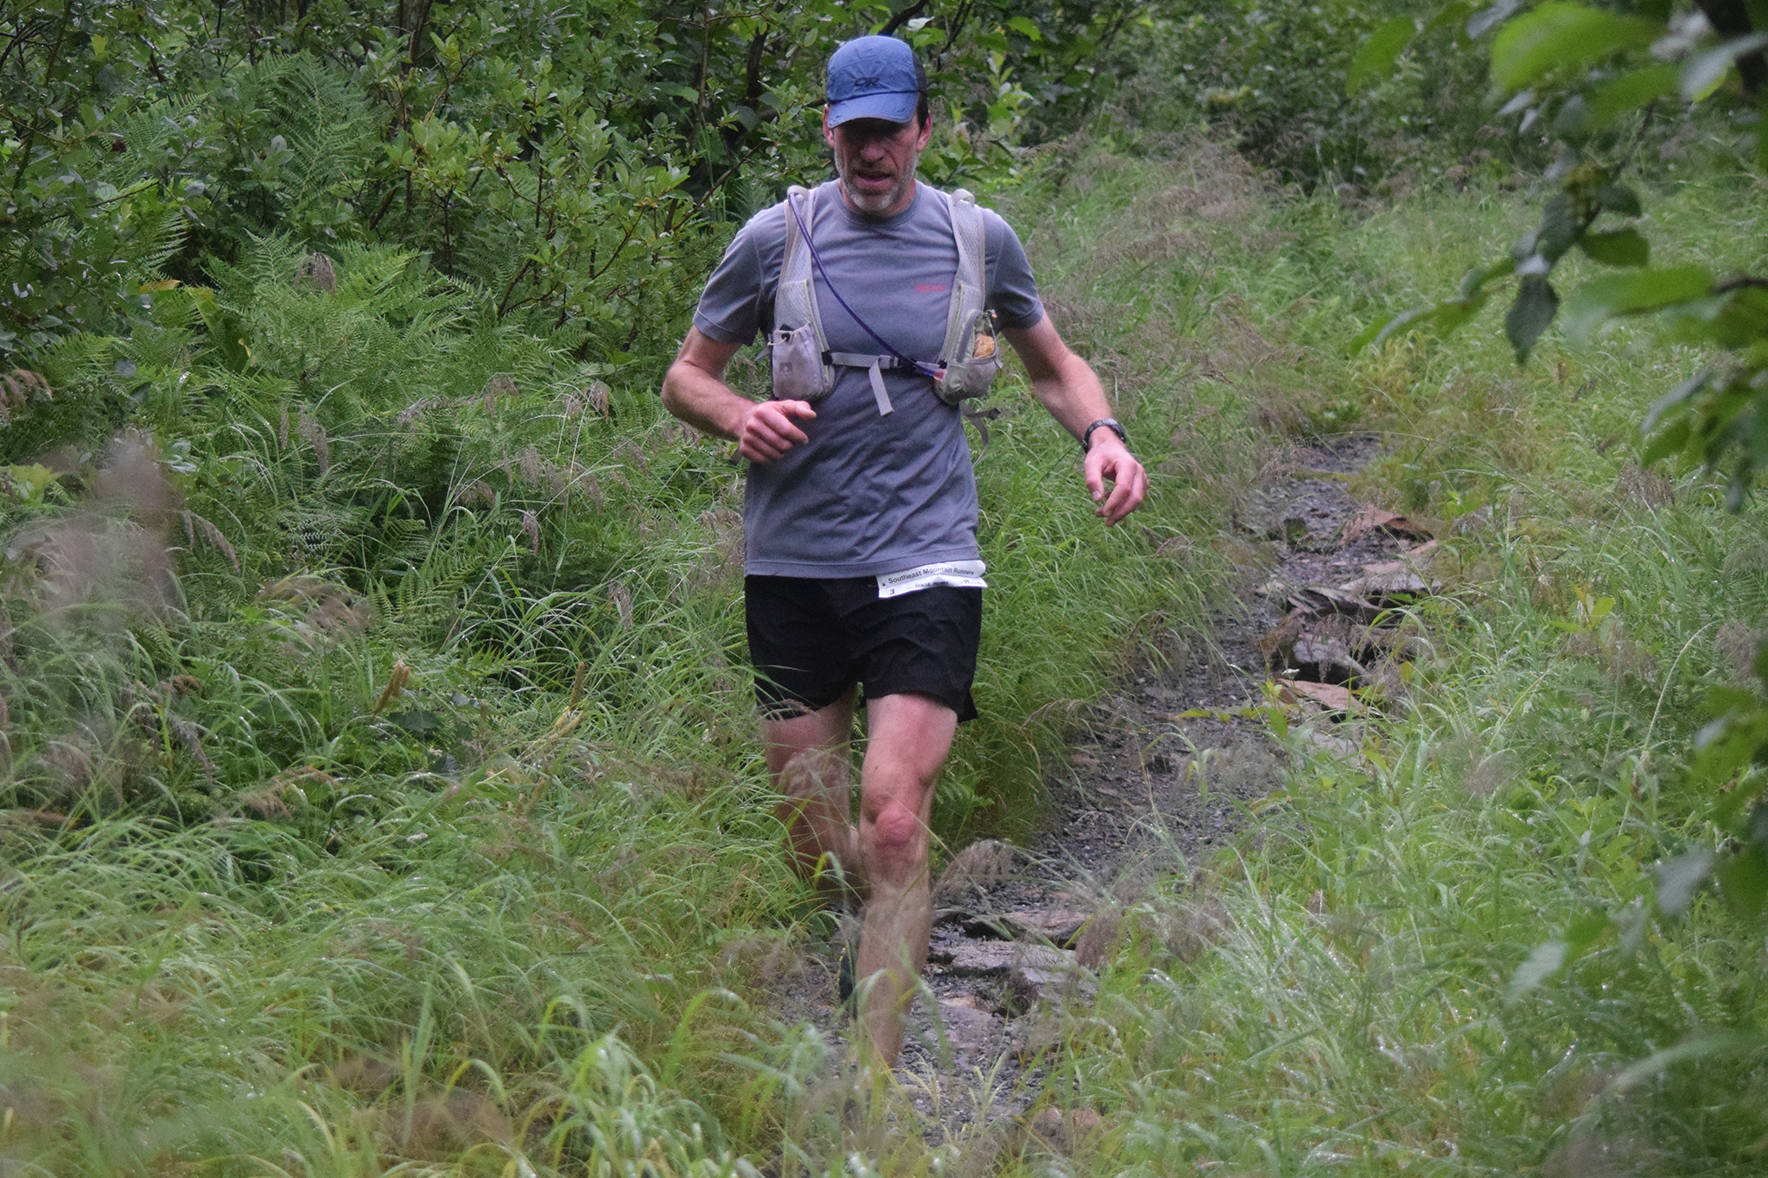 Franz Mueter descends from Mount Juneau along Granite Creek Trail while competing in the Juneau Ridge Race on Saturday, July 20, 2019. Over 60 runners participated in the 15-mile mountain running race that featured approximately 5,000 feet of elevation gain. (Nolin Ainsworth | Juneau Empire)